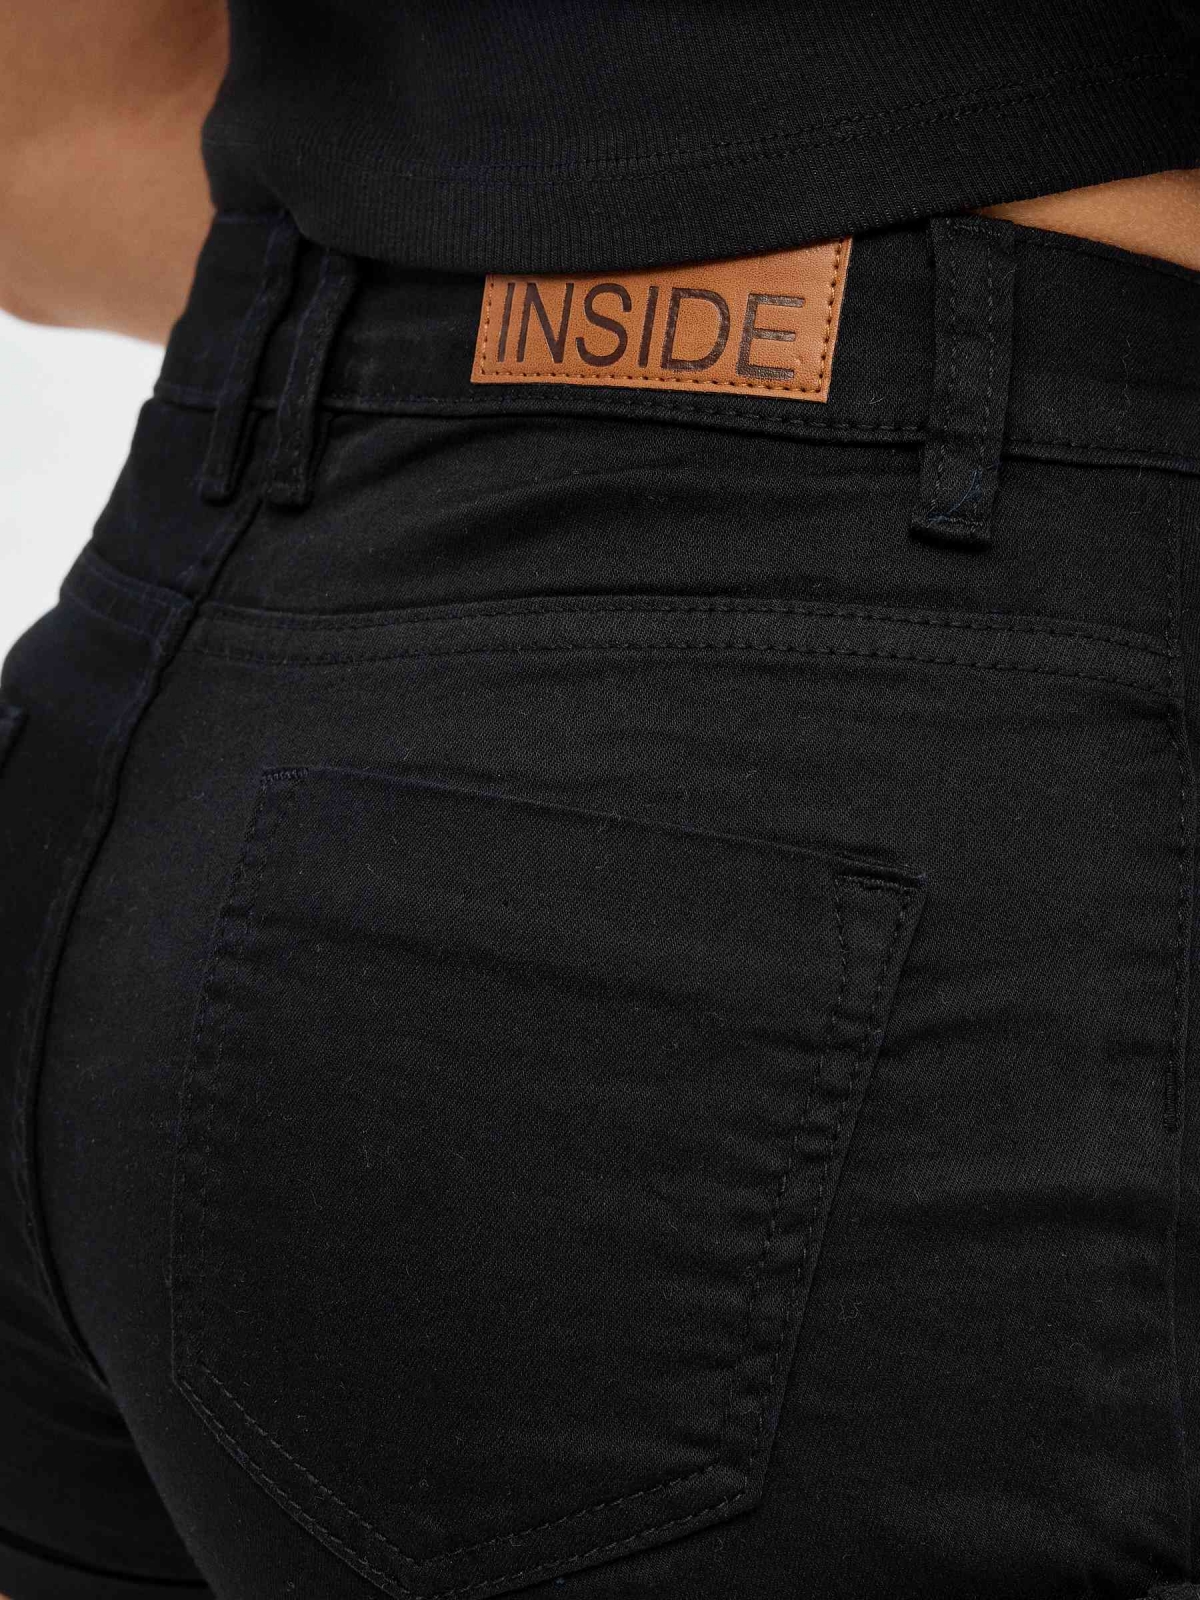 Colorful twill shorts black detail view